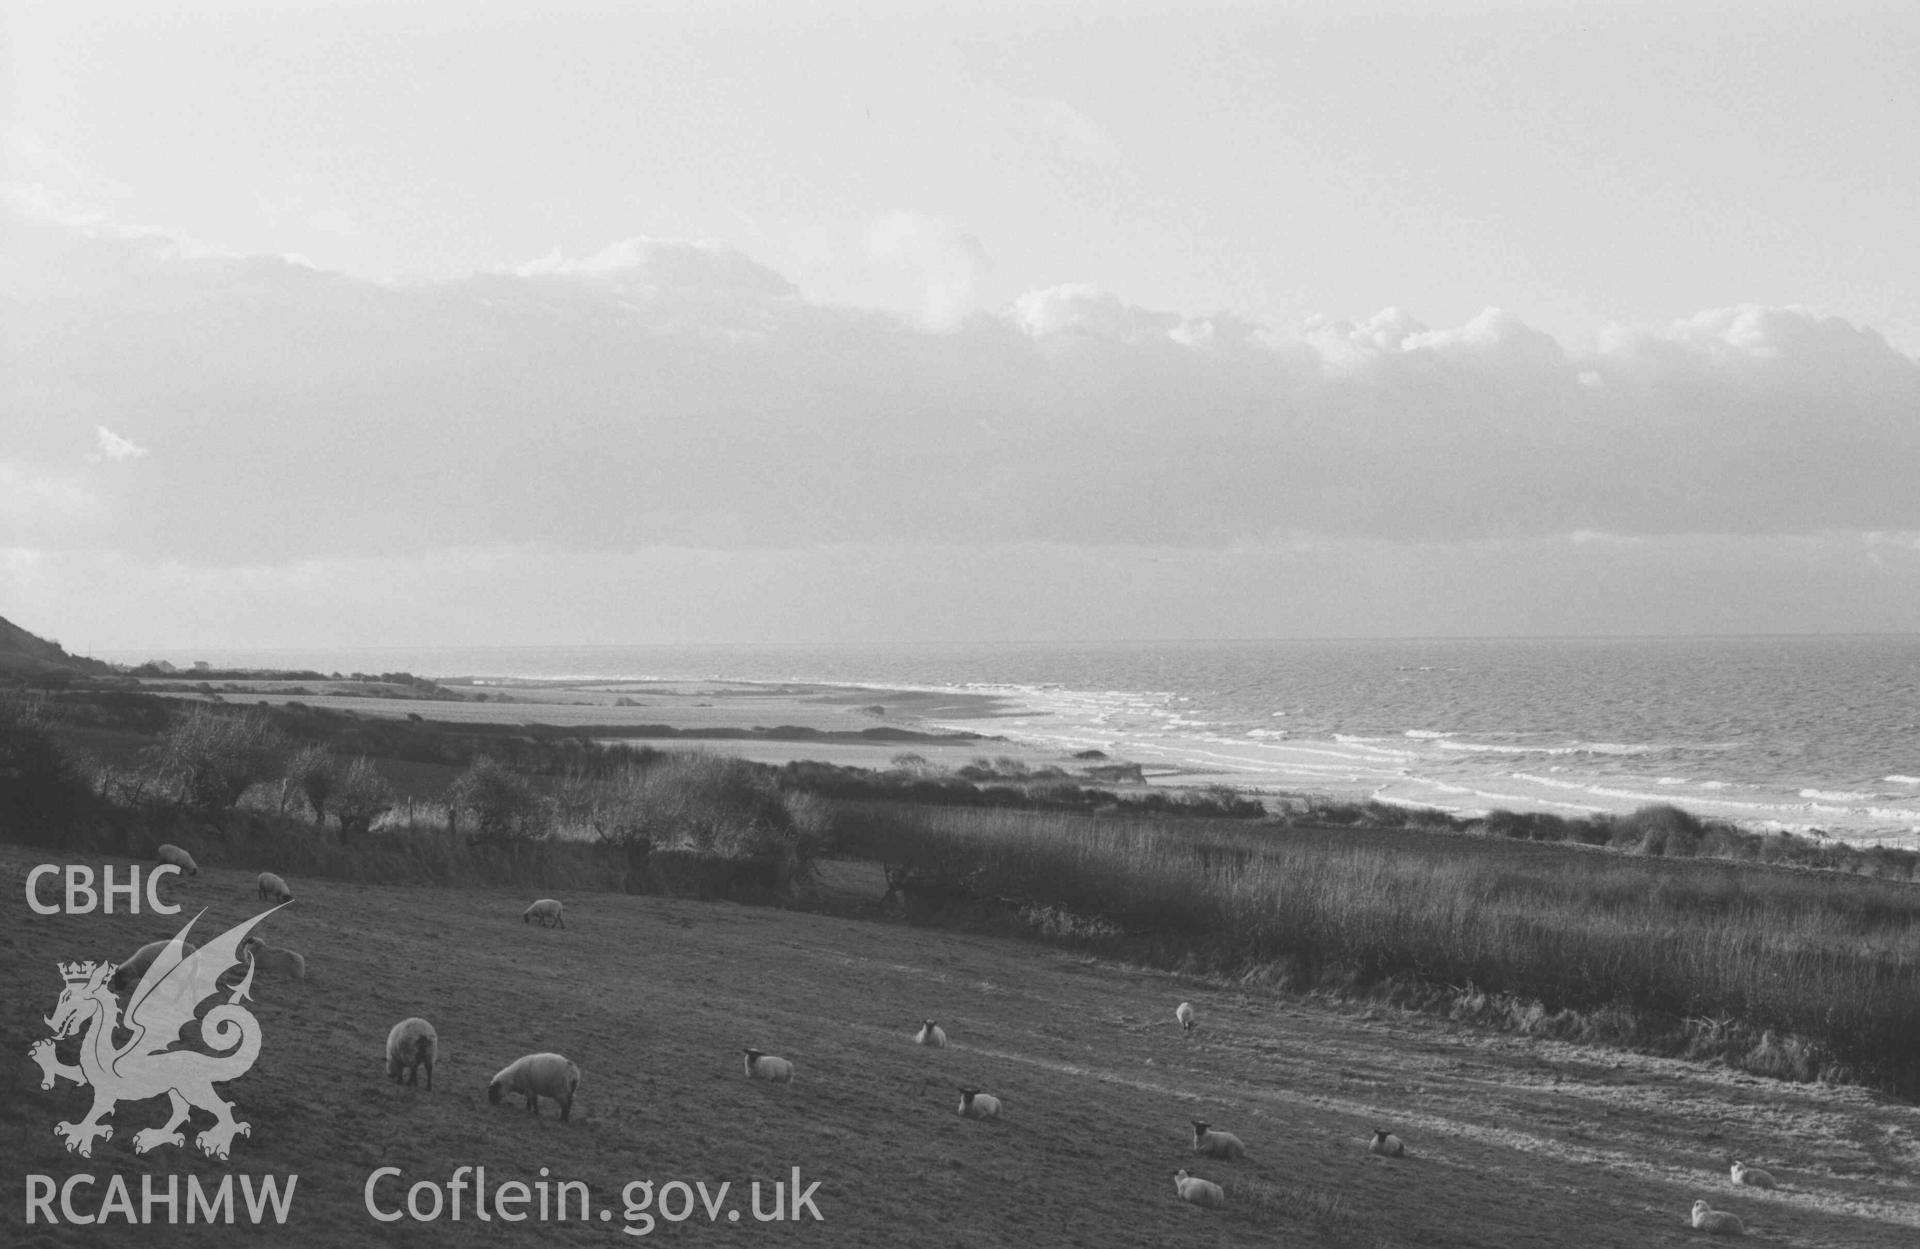 Digital copy of a black and white negative showing view towards Aberaeron from the main road 300m south west of Aberarth. Photographed by Arthur Chater on 28 December 1968. Looking west from Grid Reference SN 477 636.